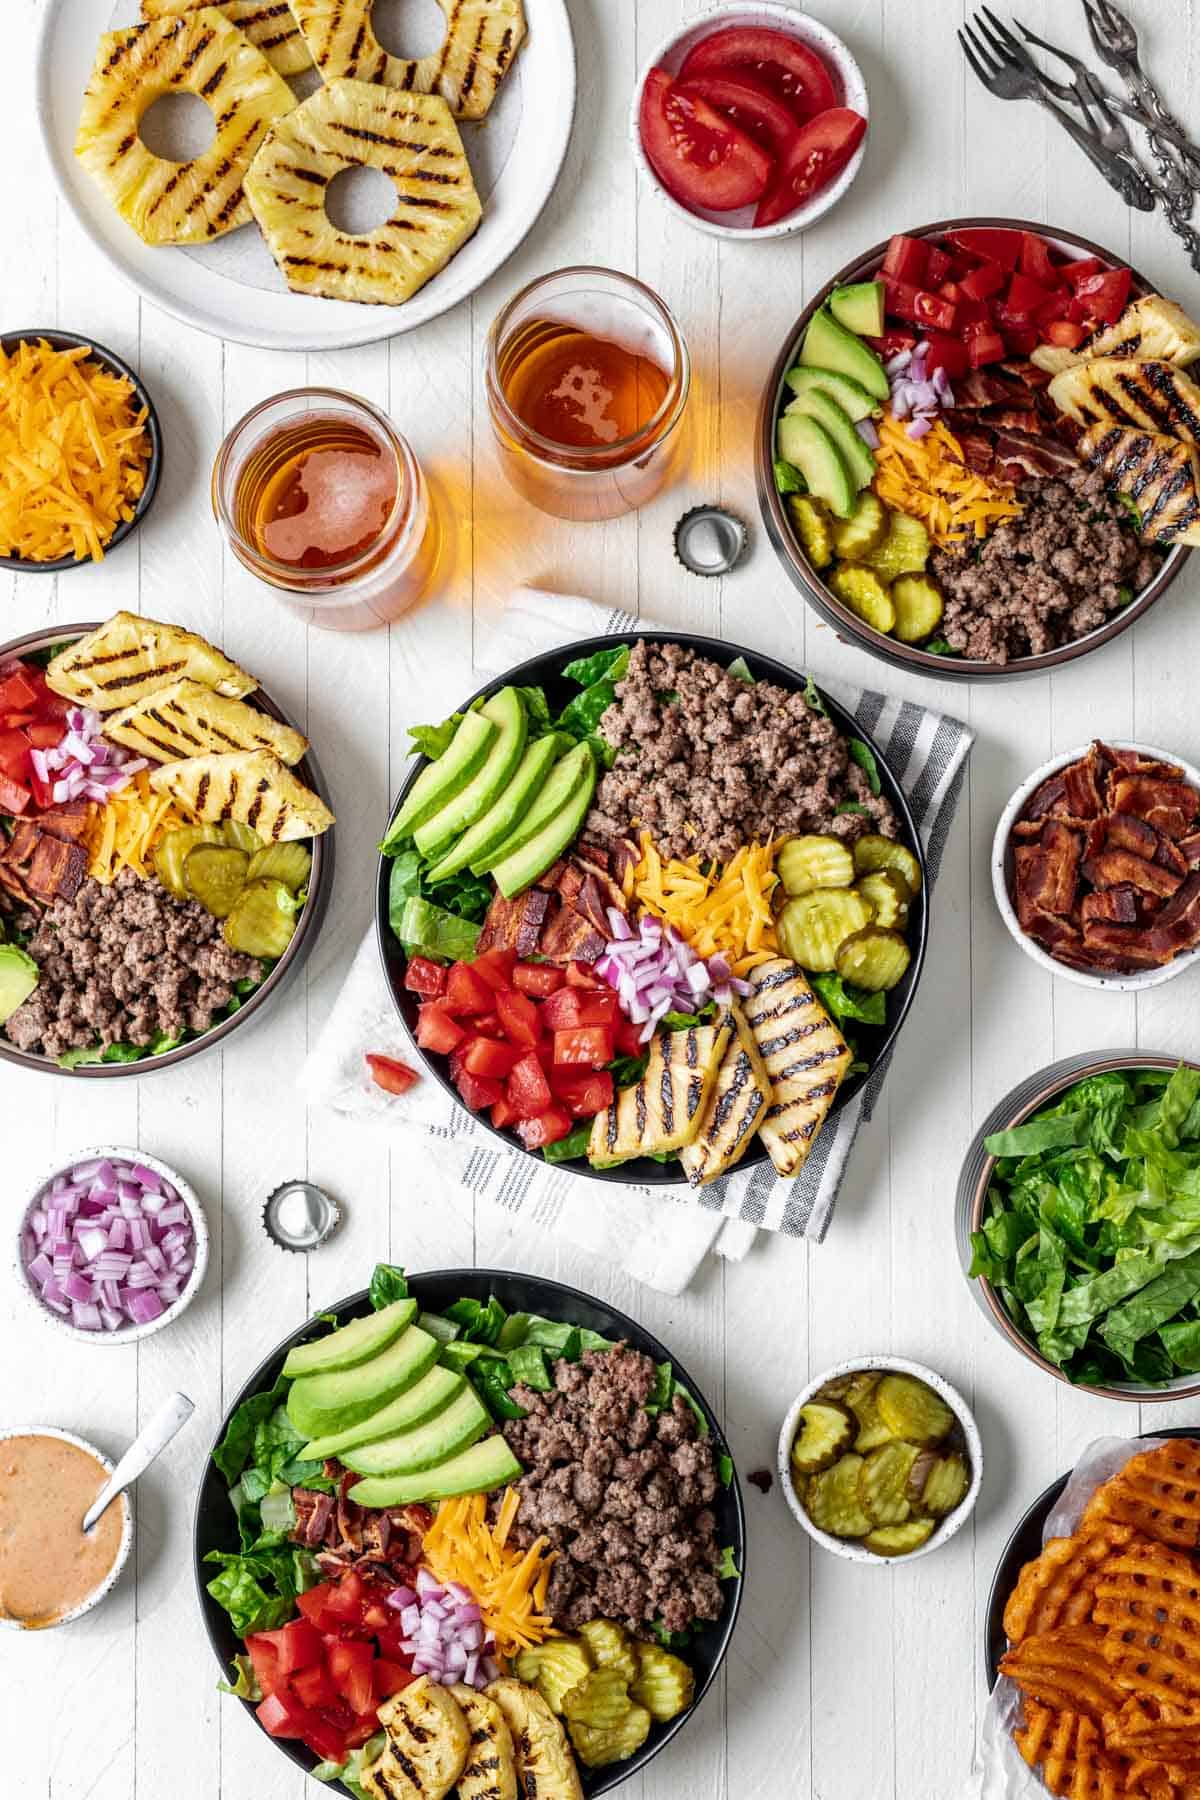 Bowls filled with lettuce, ground beef, bacon, cheese, pickles, onions, tomatoes, grilled pineapple, and avocado surrounded by the rest of the burger fixings.